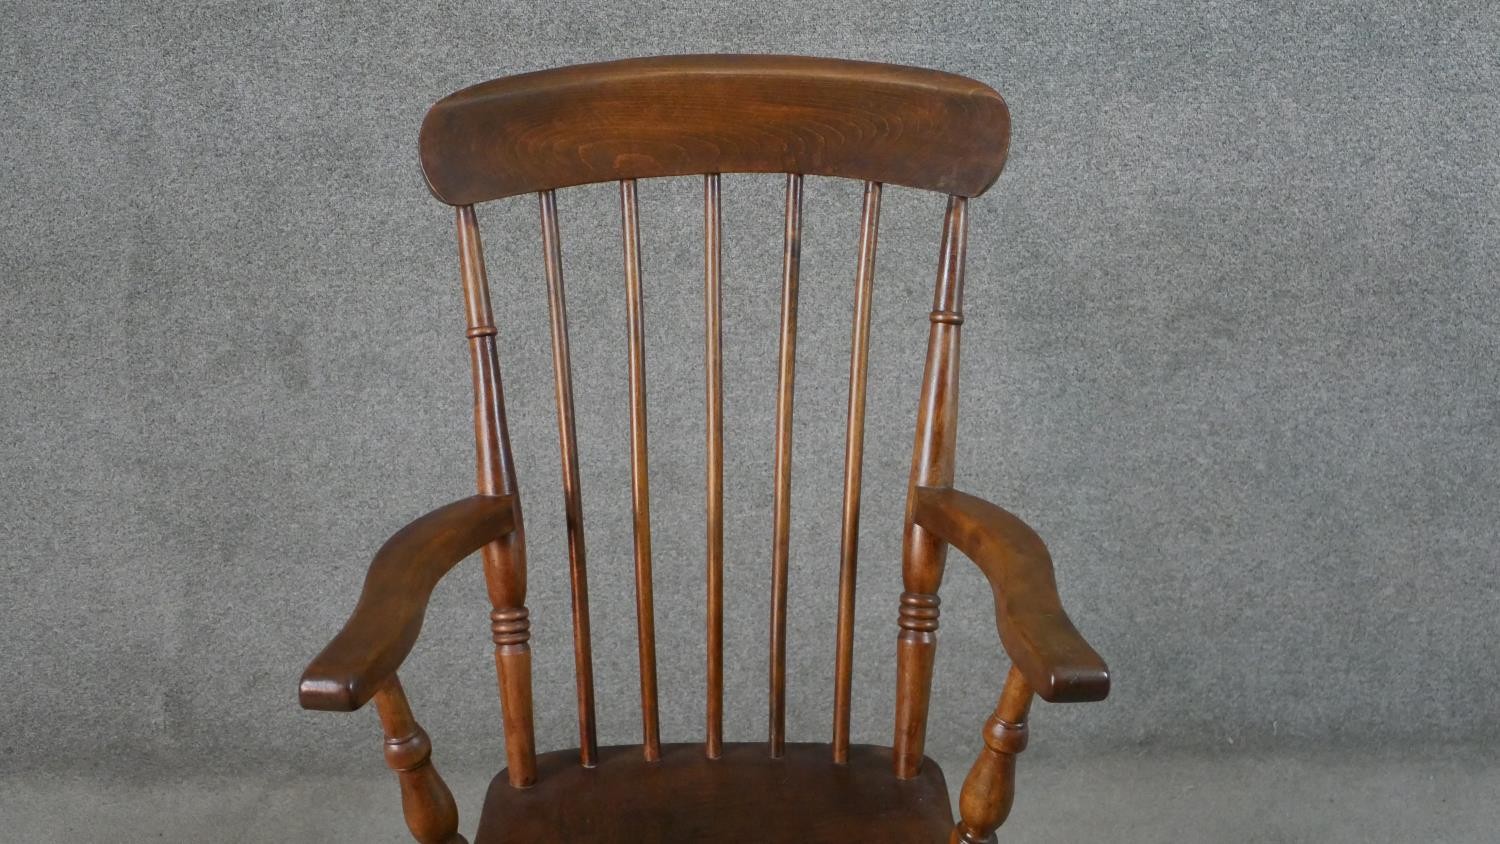 A 19th century style comb back rocking chair, with an elm seat, on turned legs joined by stretchers. - Image 4 of 4